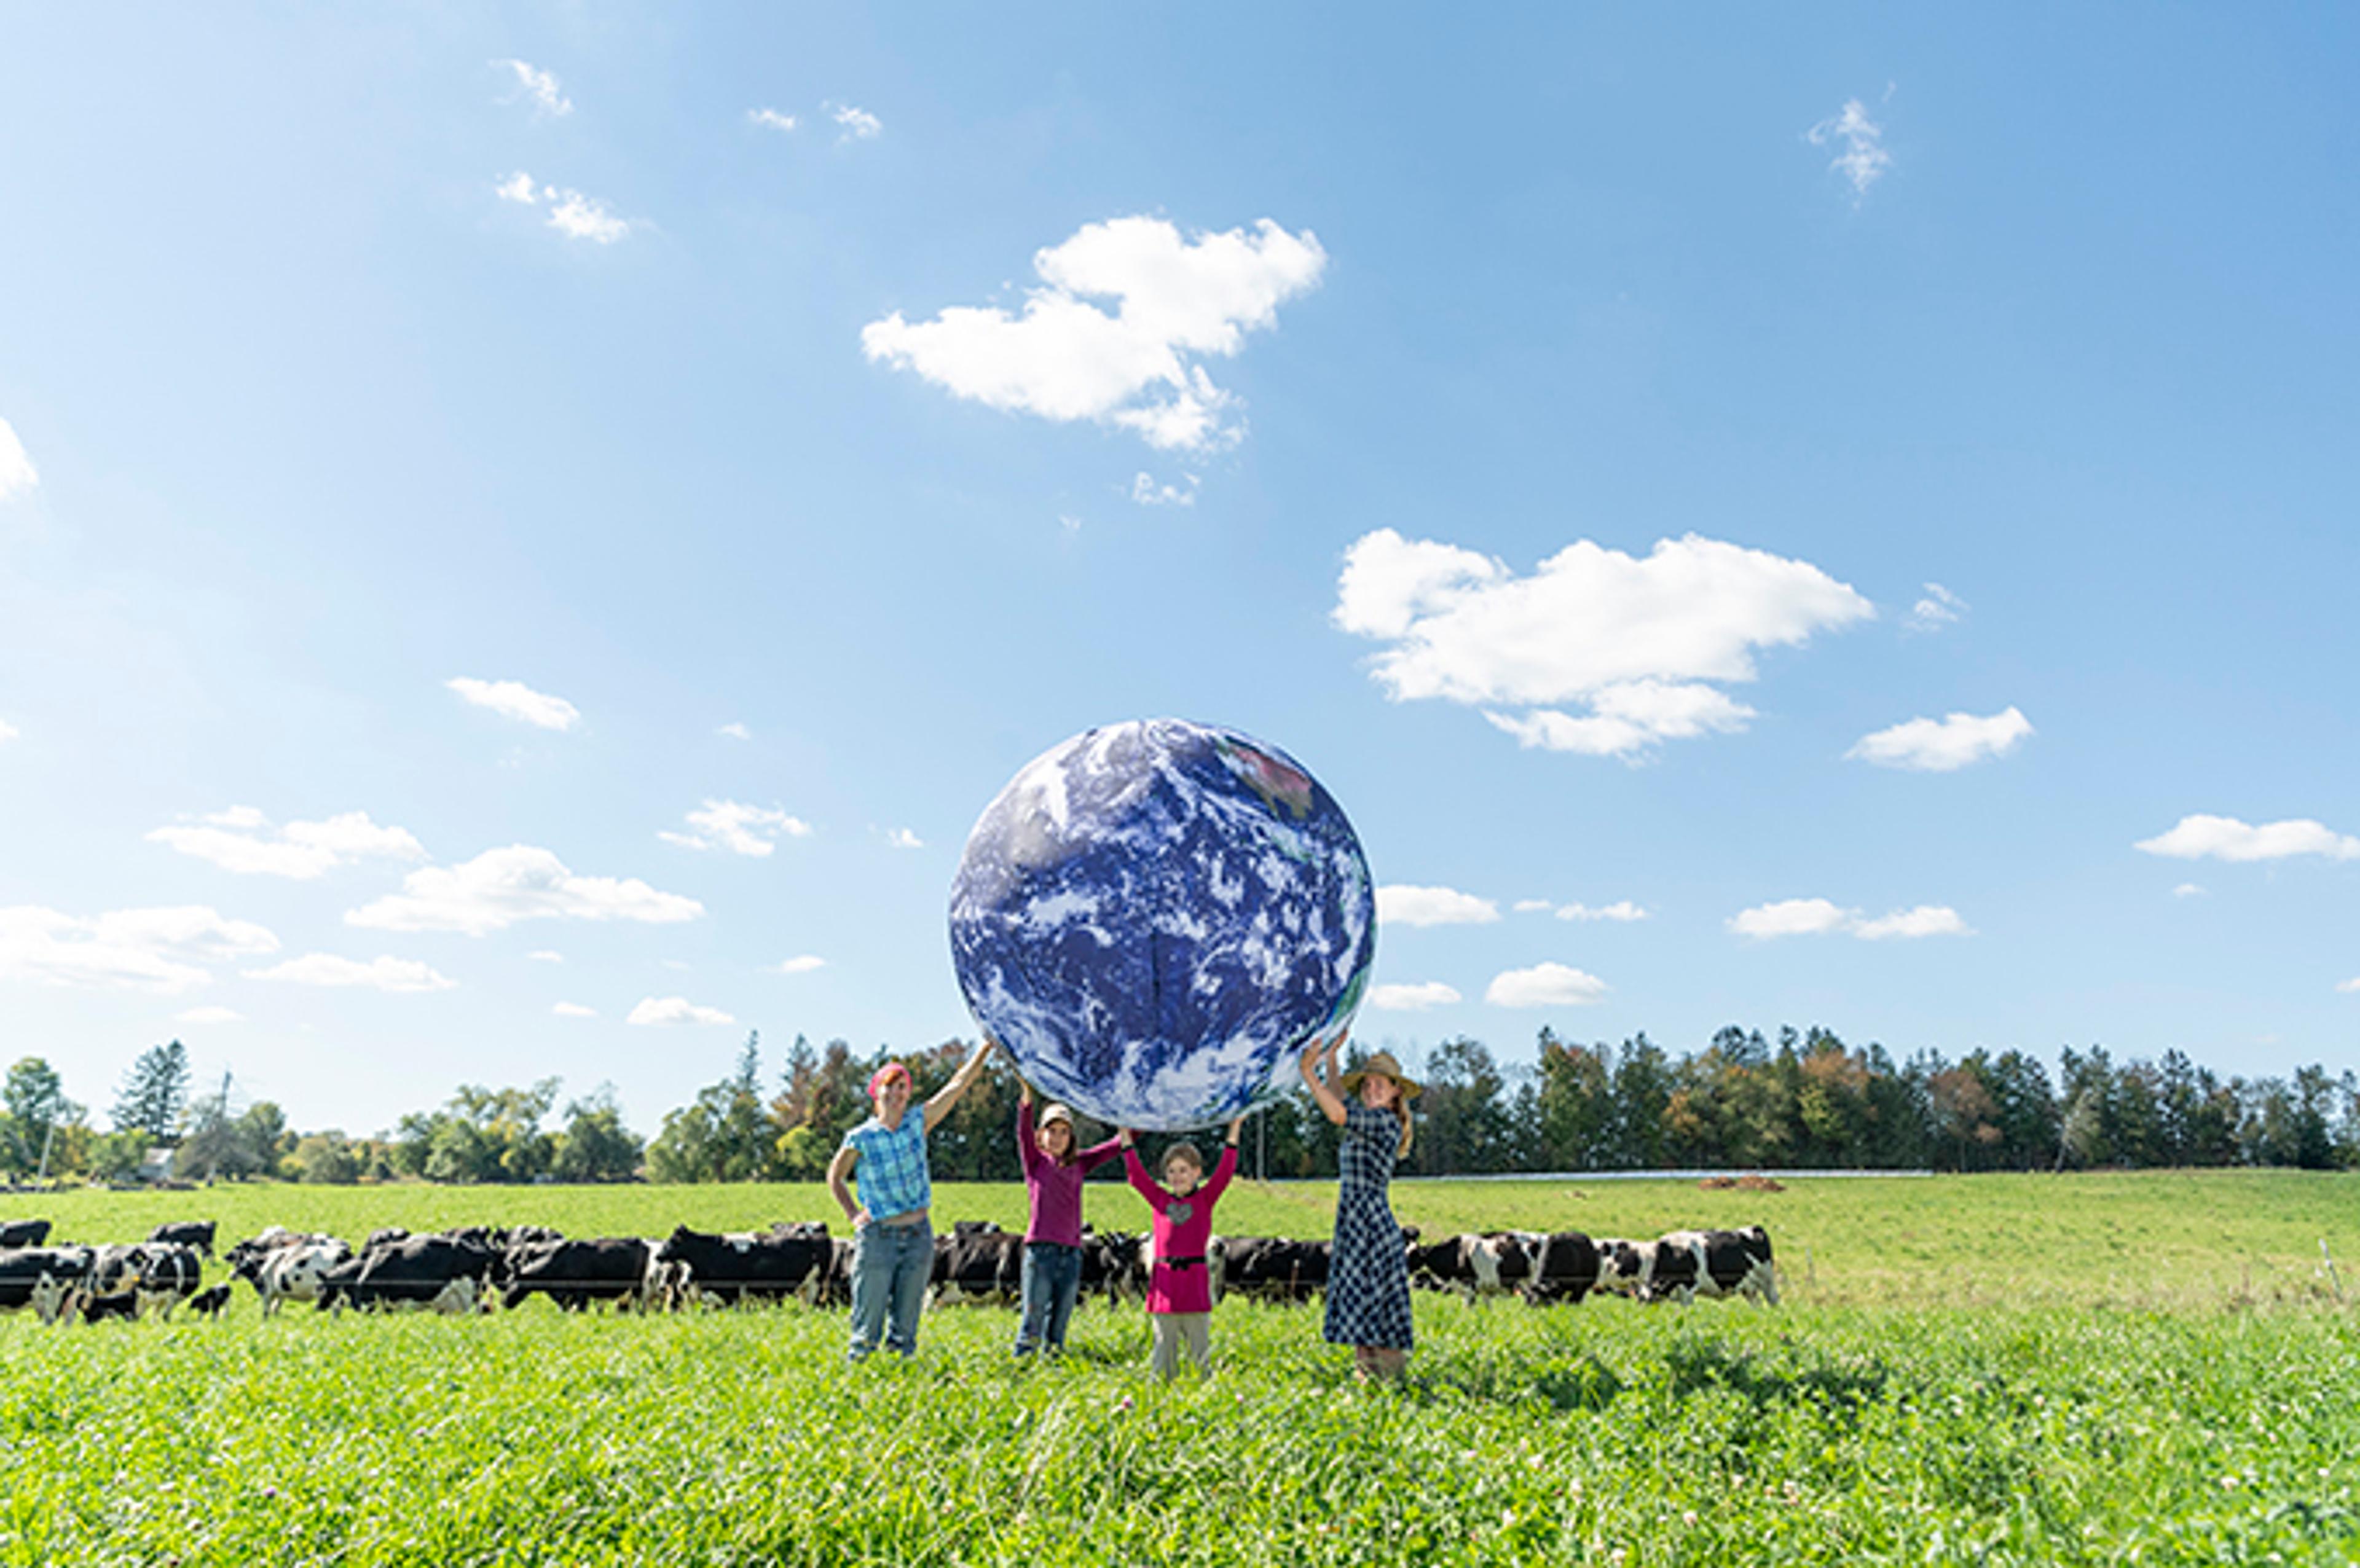 Farmers and family holding a large earth in a cow pasture surounded by cows.